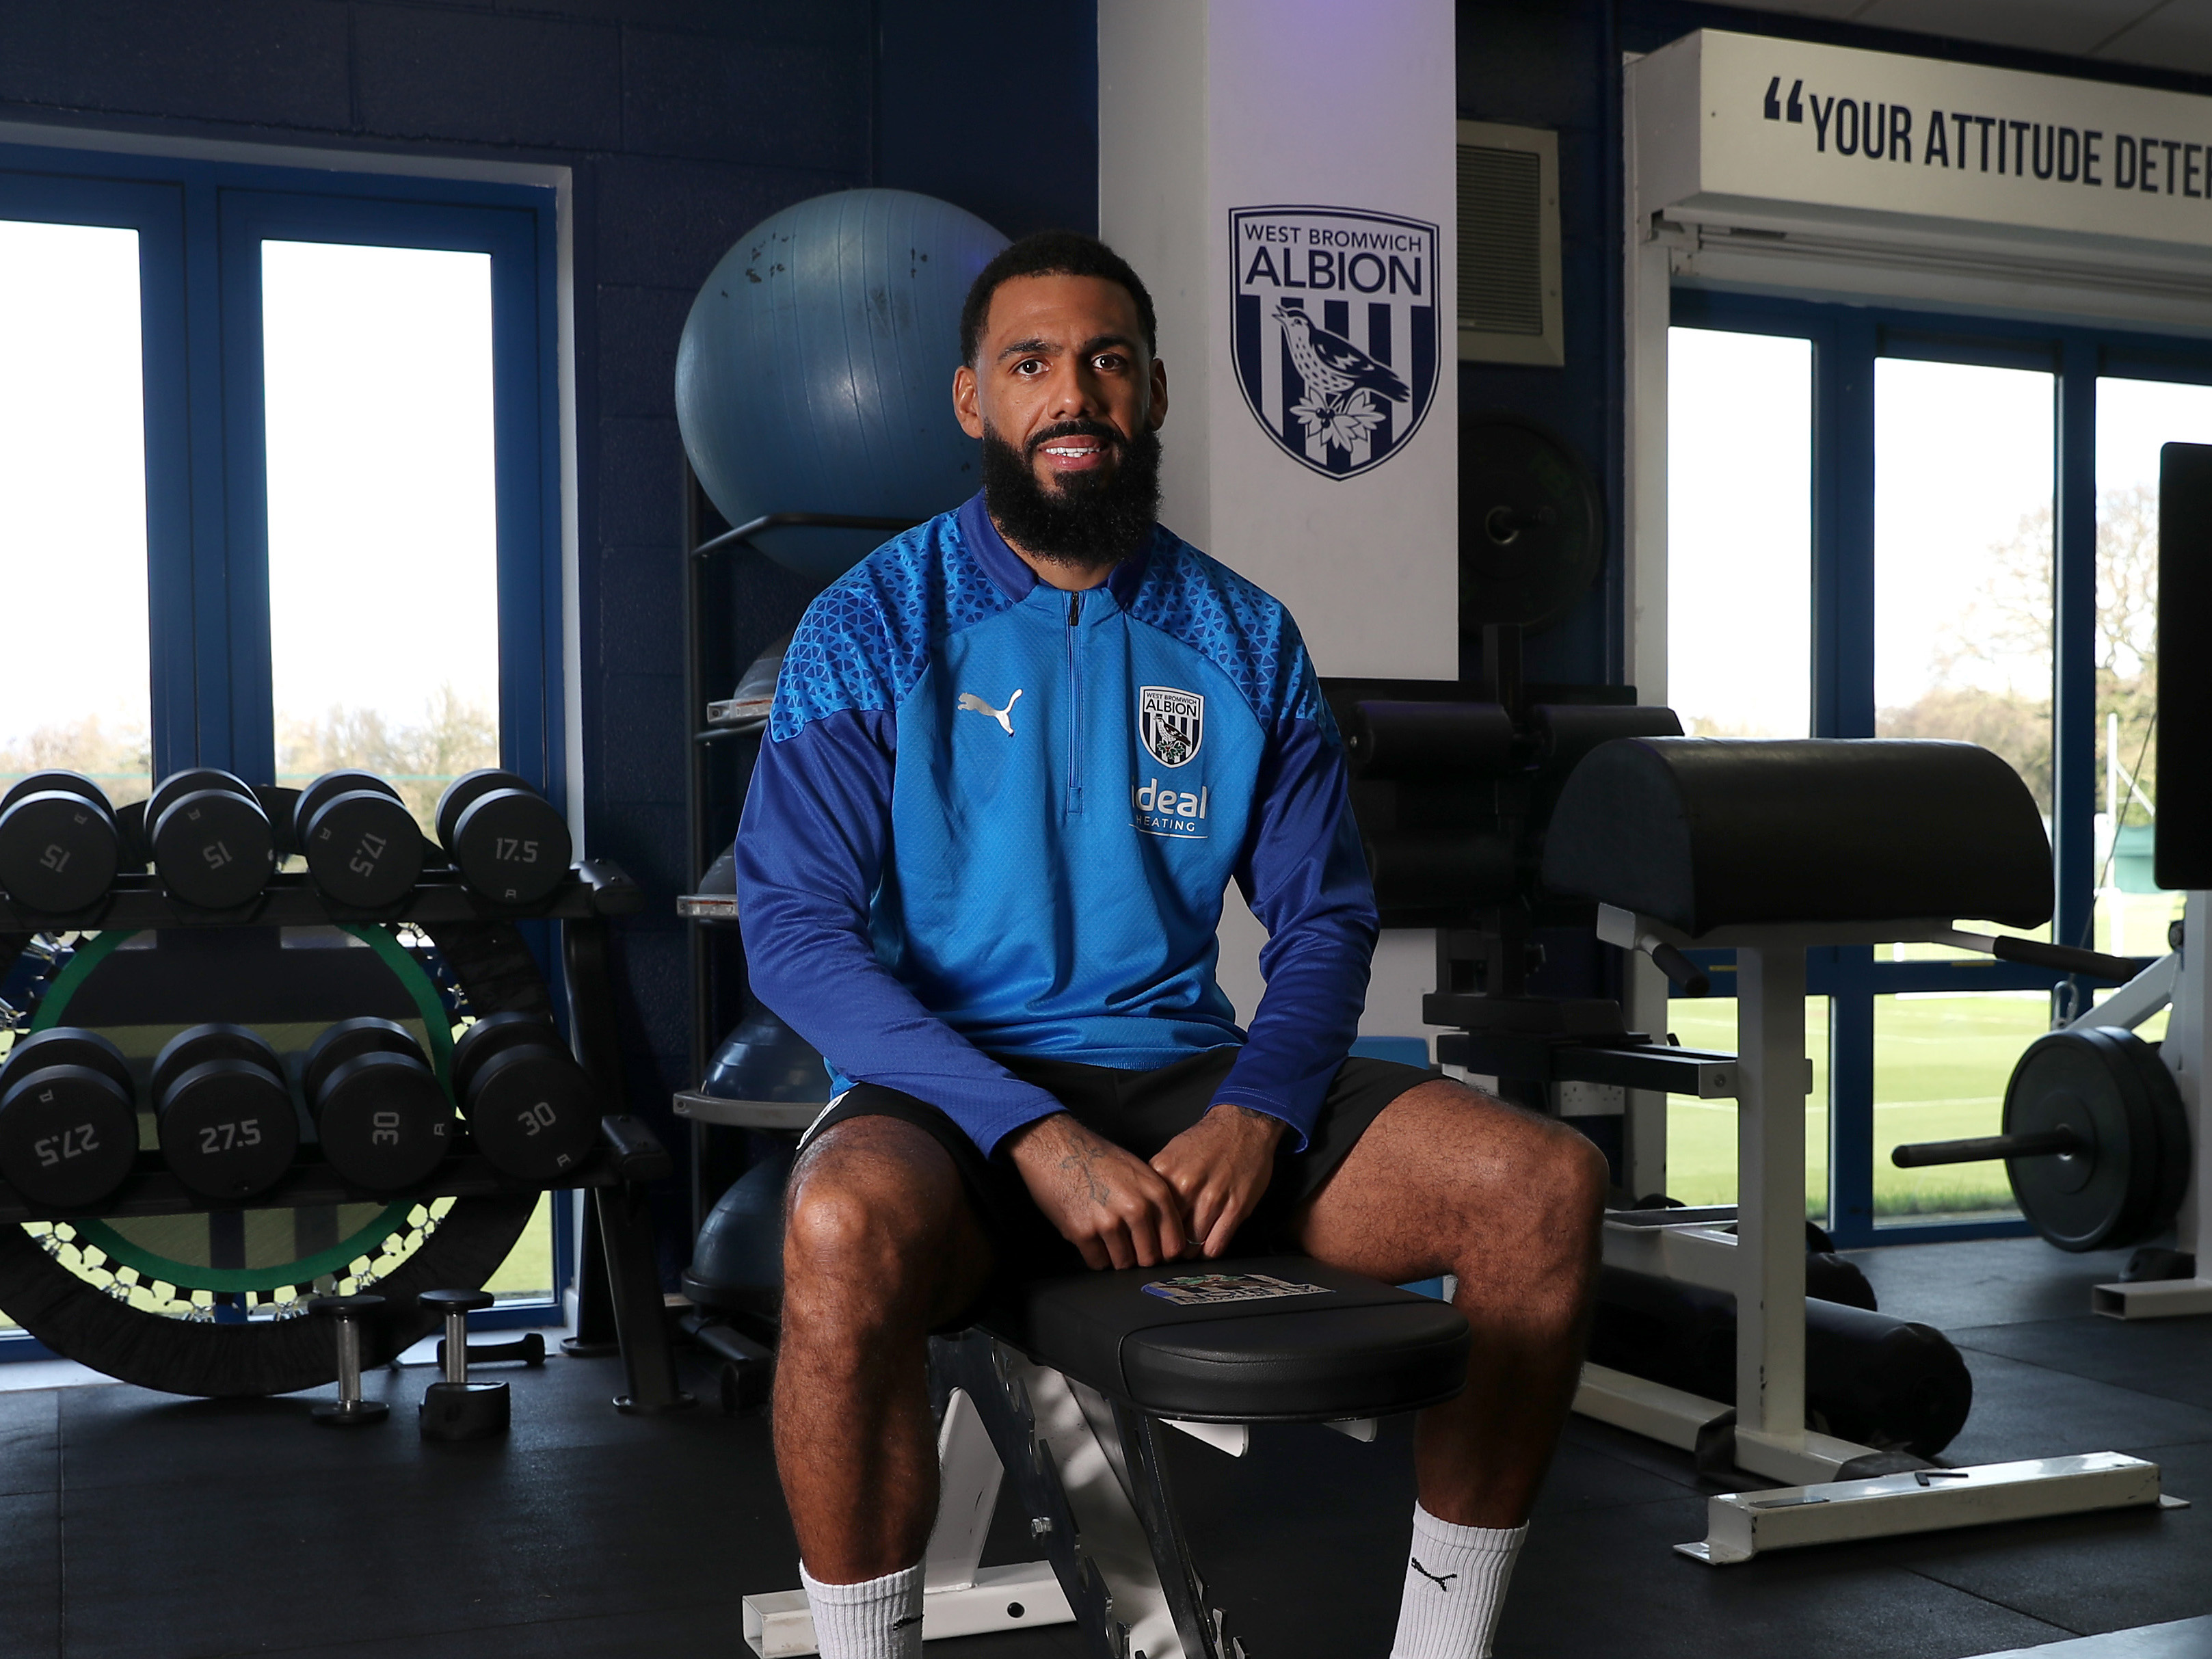 Yann M'Vila sat looking at the camera smiling in the gym